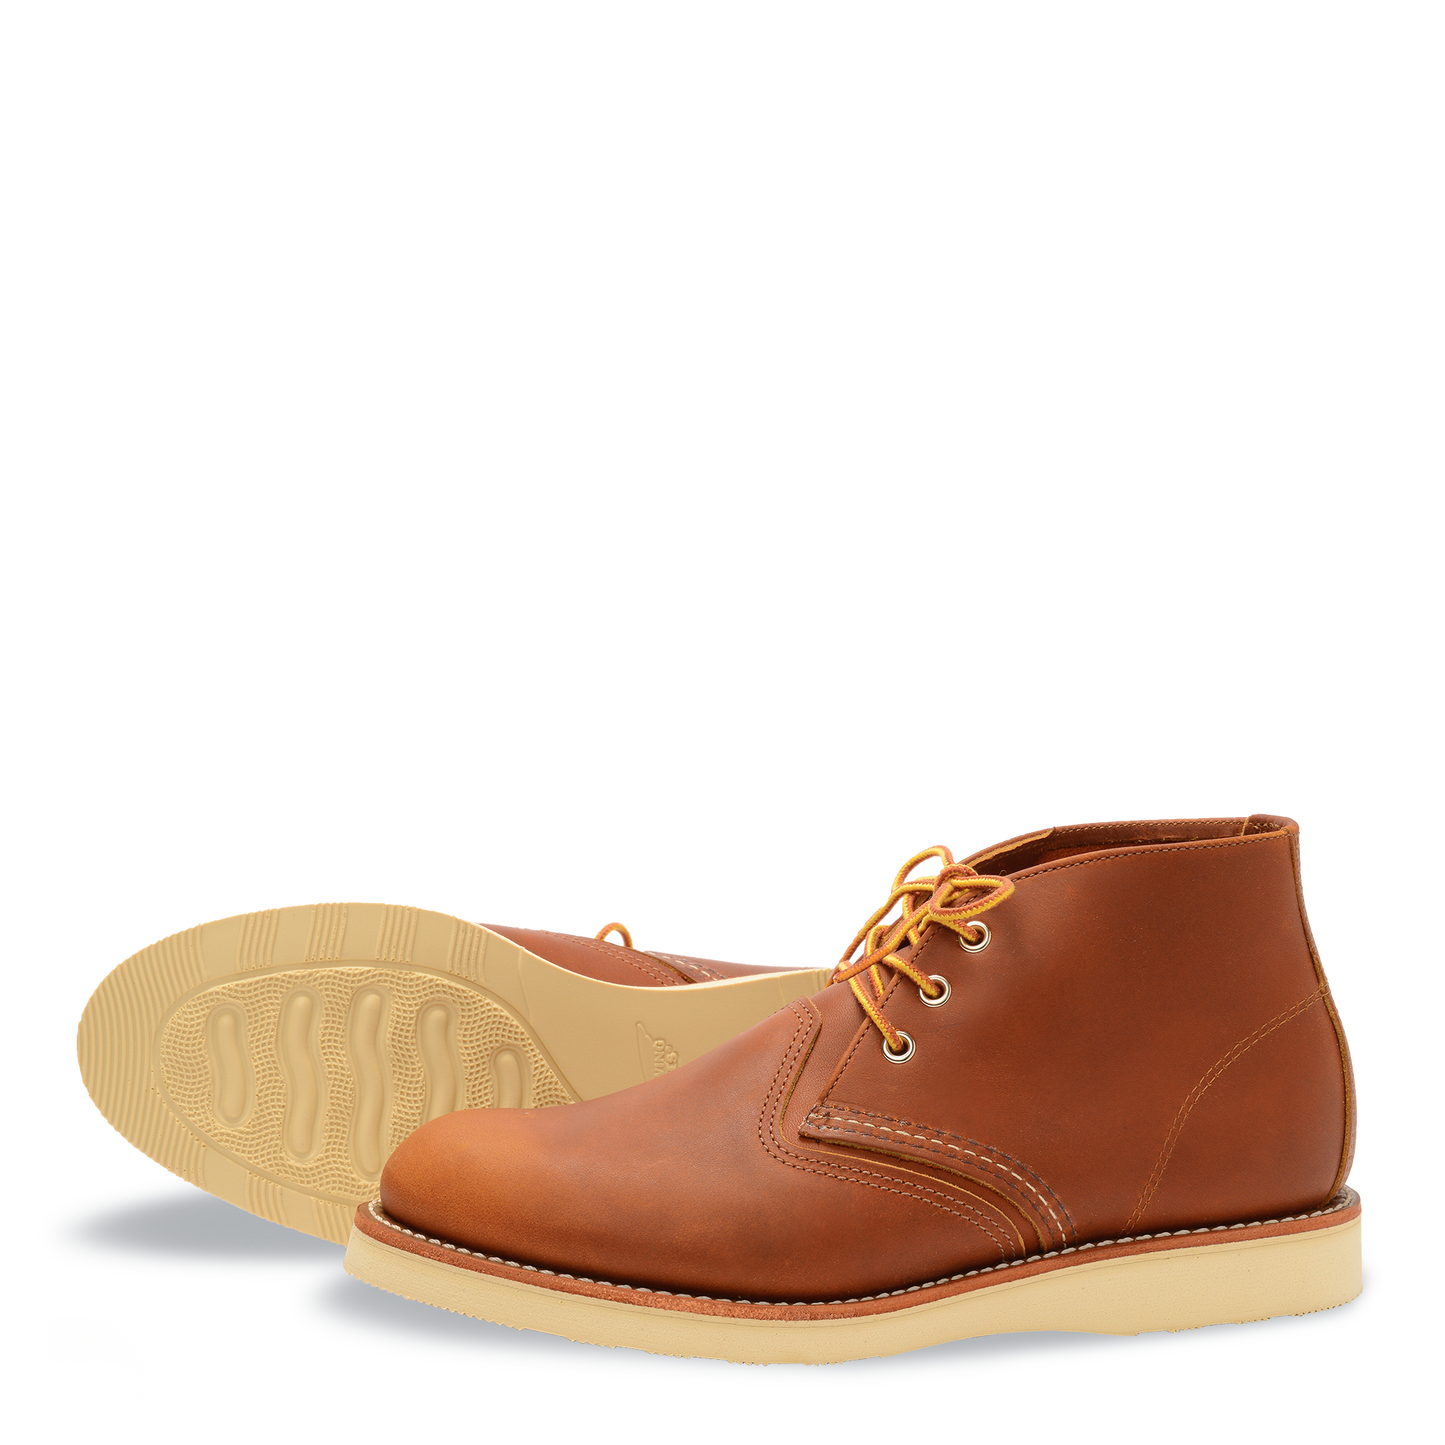 Red Wing 3140 Classic Chukka